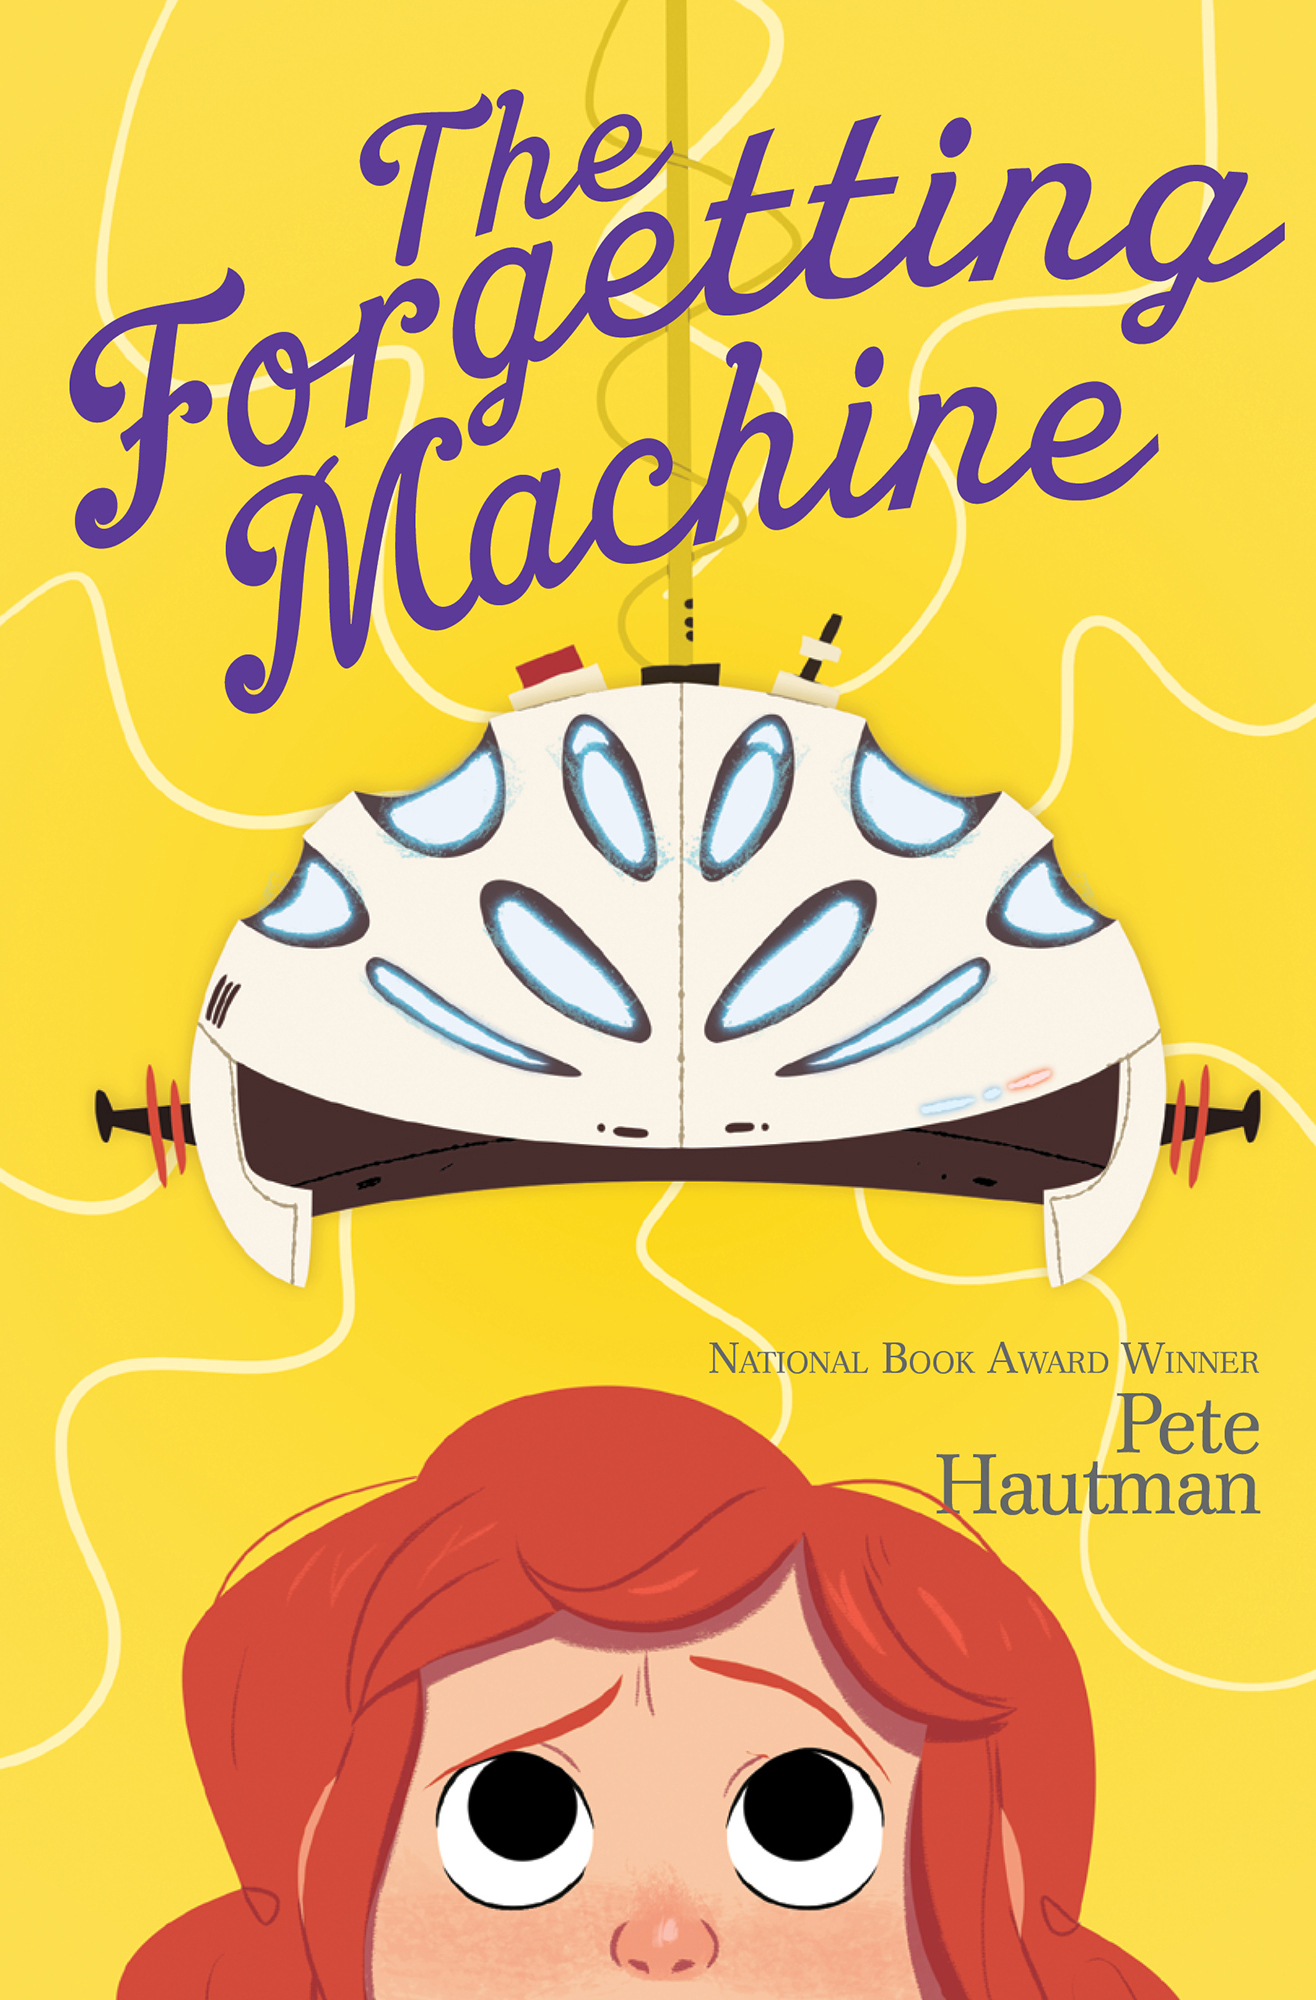 The Forgetting Machine by Pete Hautman